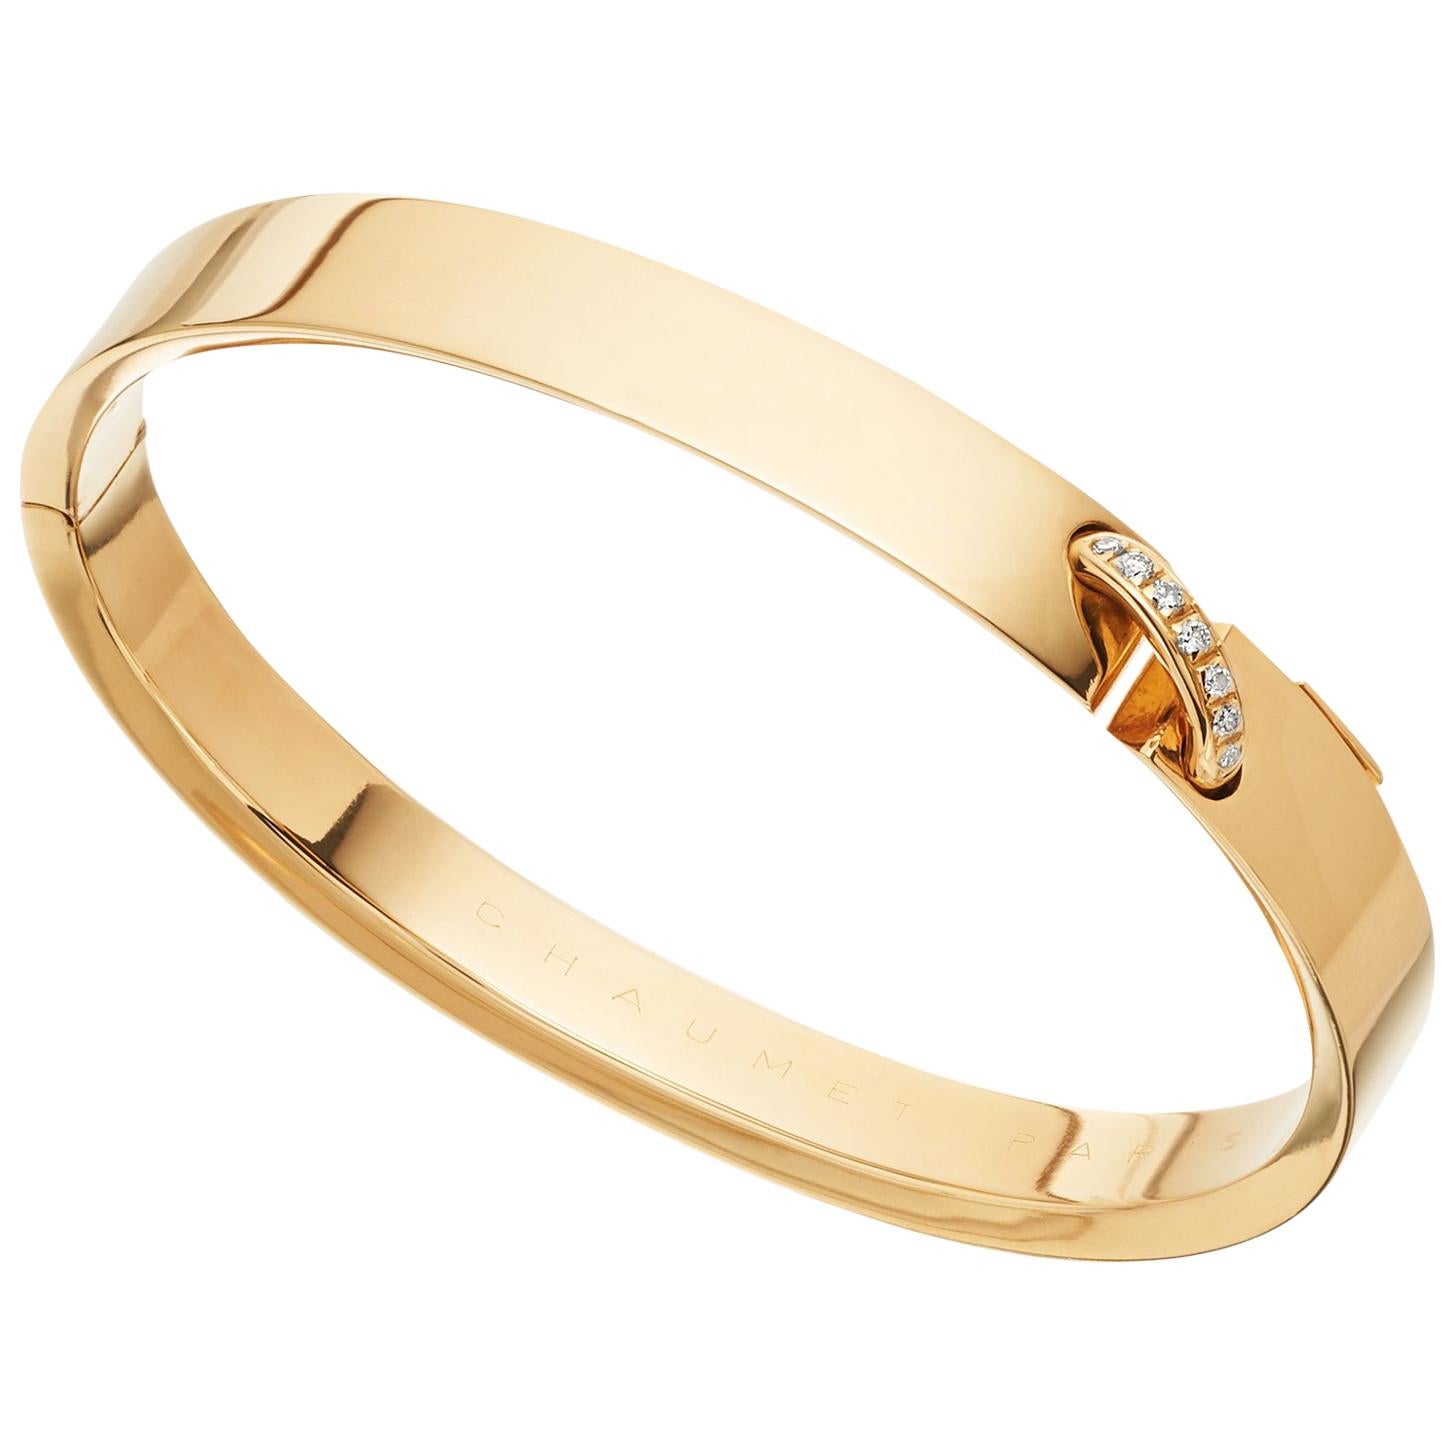 Chaumet Paris French, Liens Évidence Diamond Bangle Bracelet in 18 Carat  Gold at 1stDibs